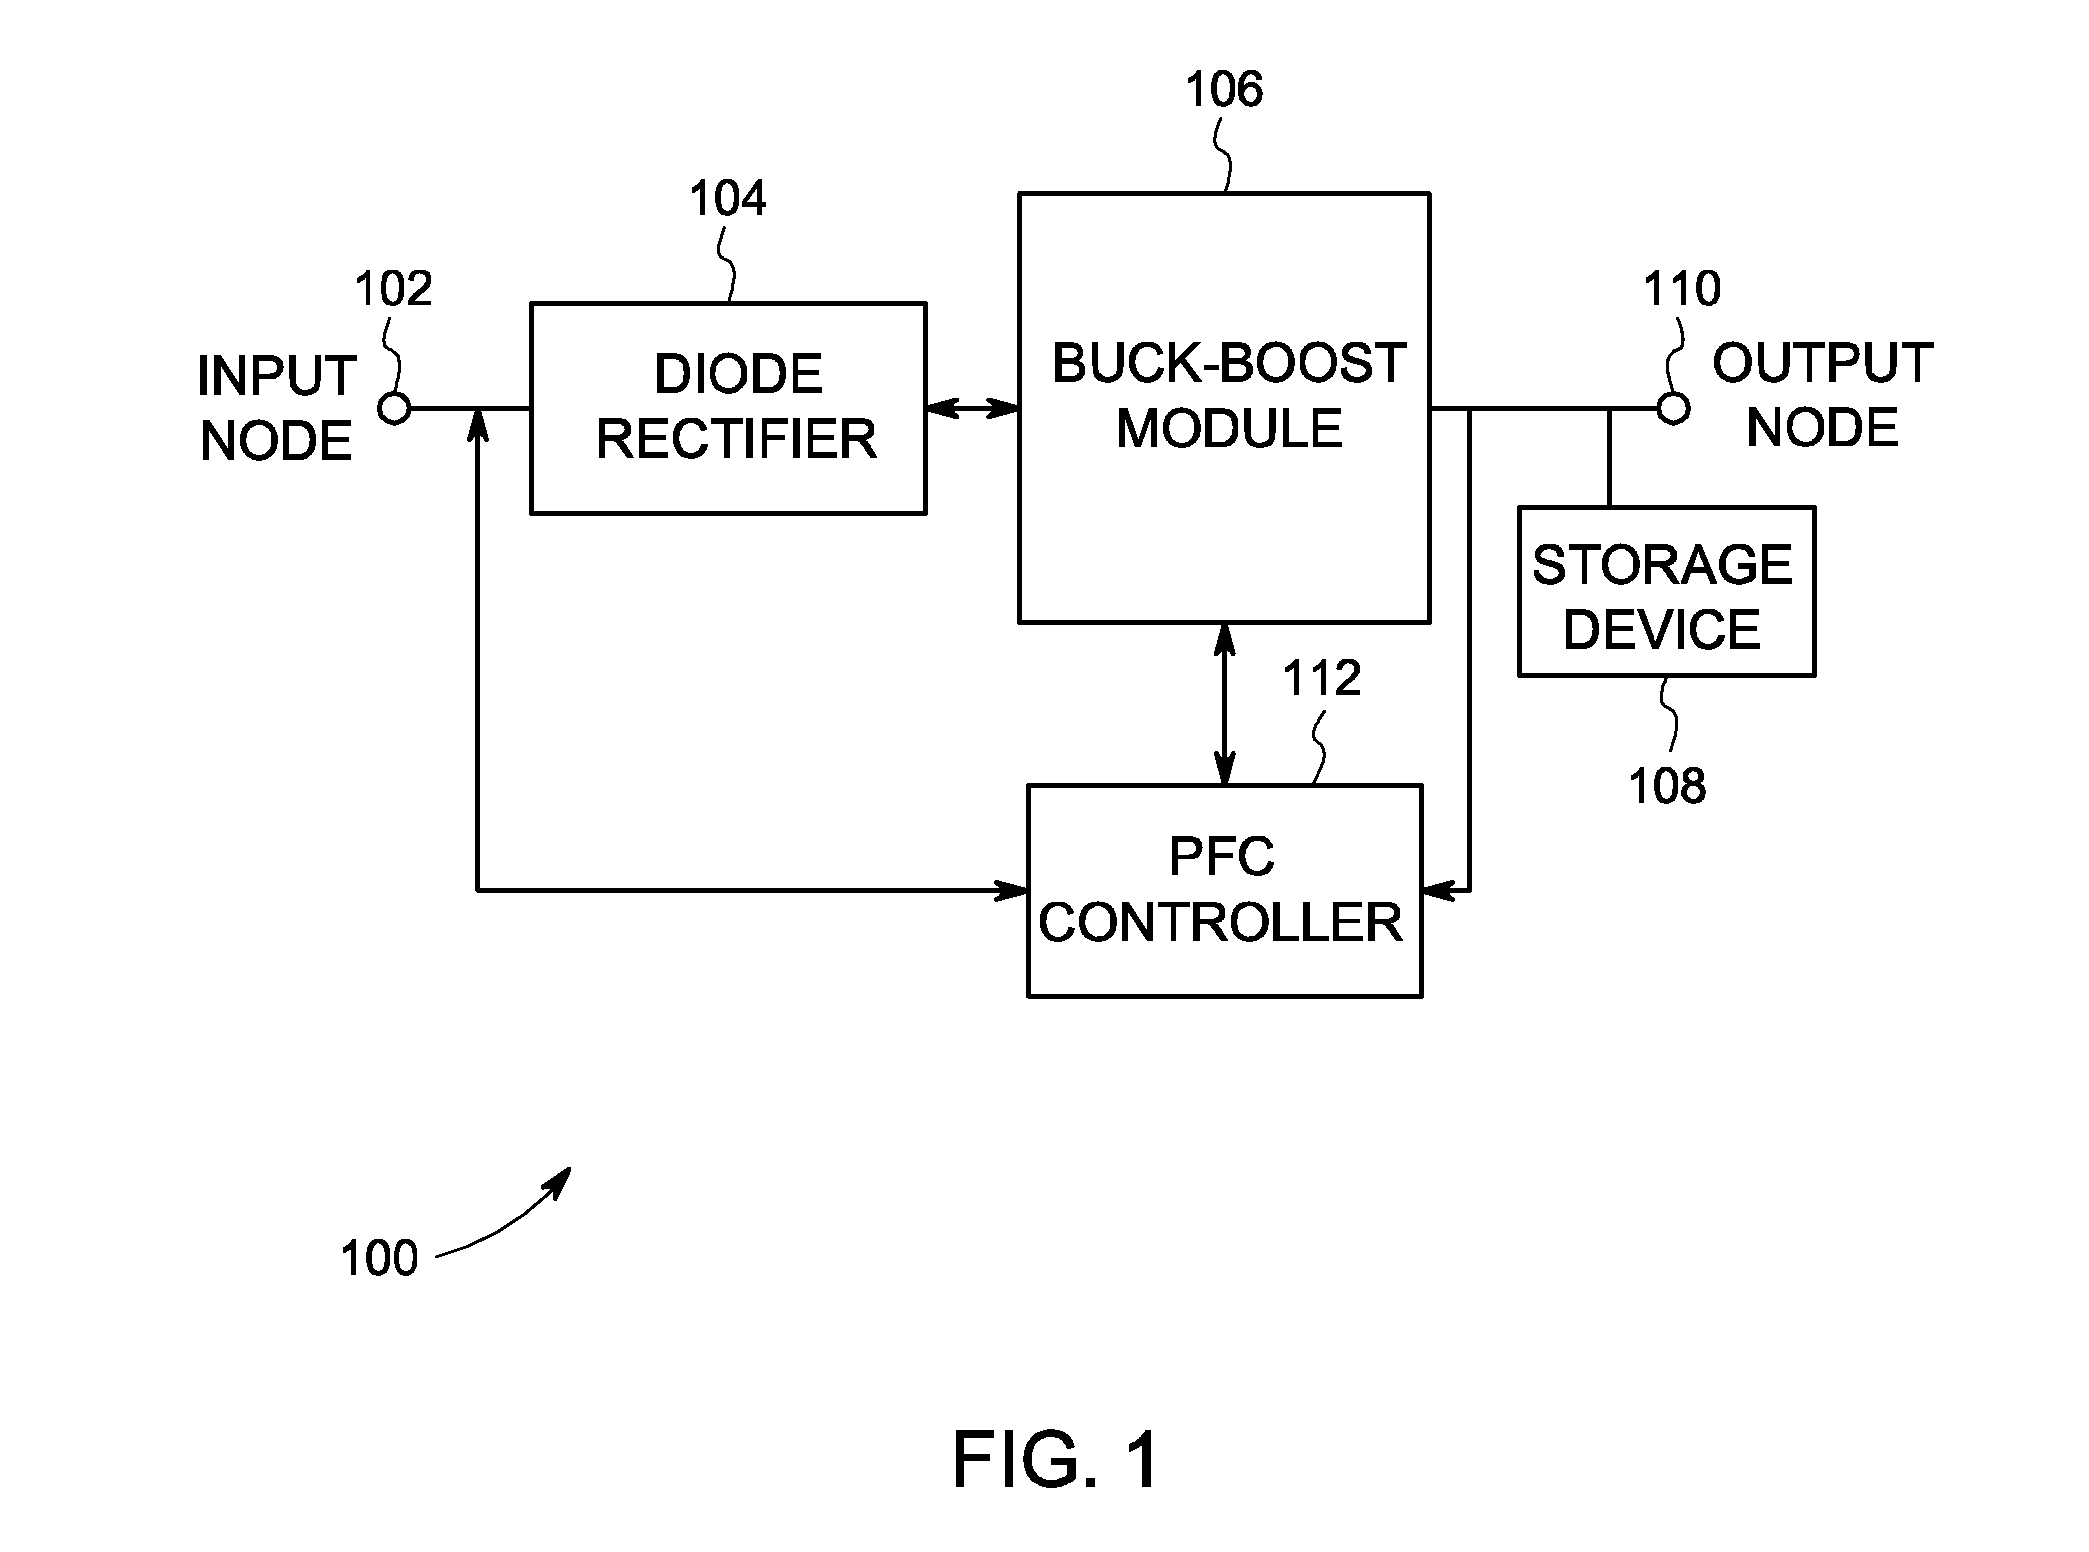 Power factor correction (PFC) circuit configured to control high pulse load current and inrush current